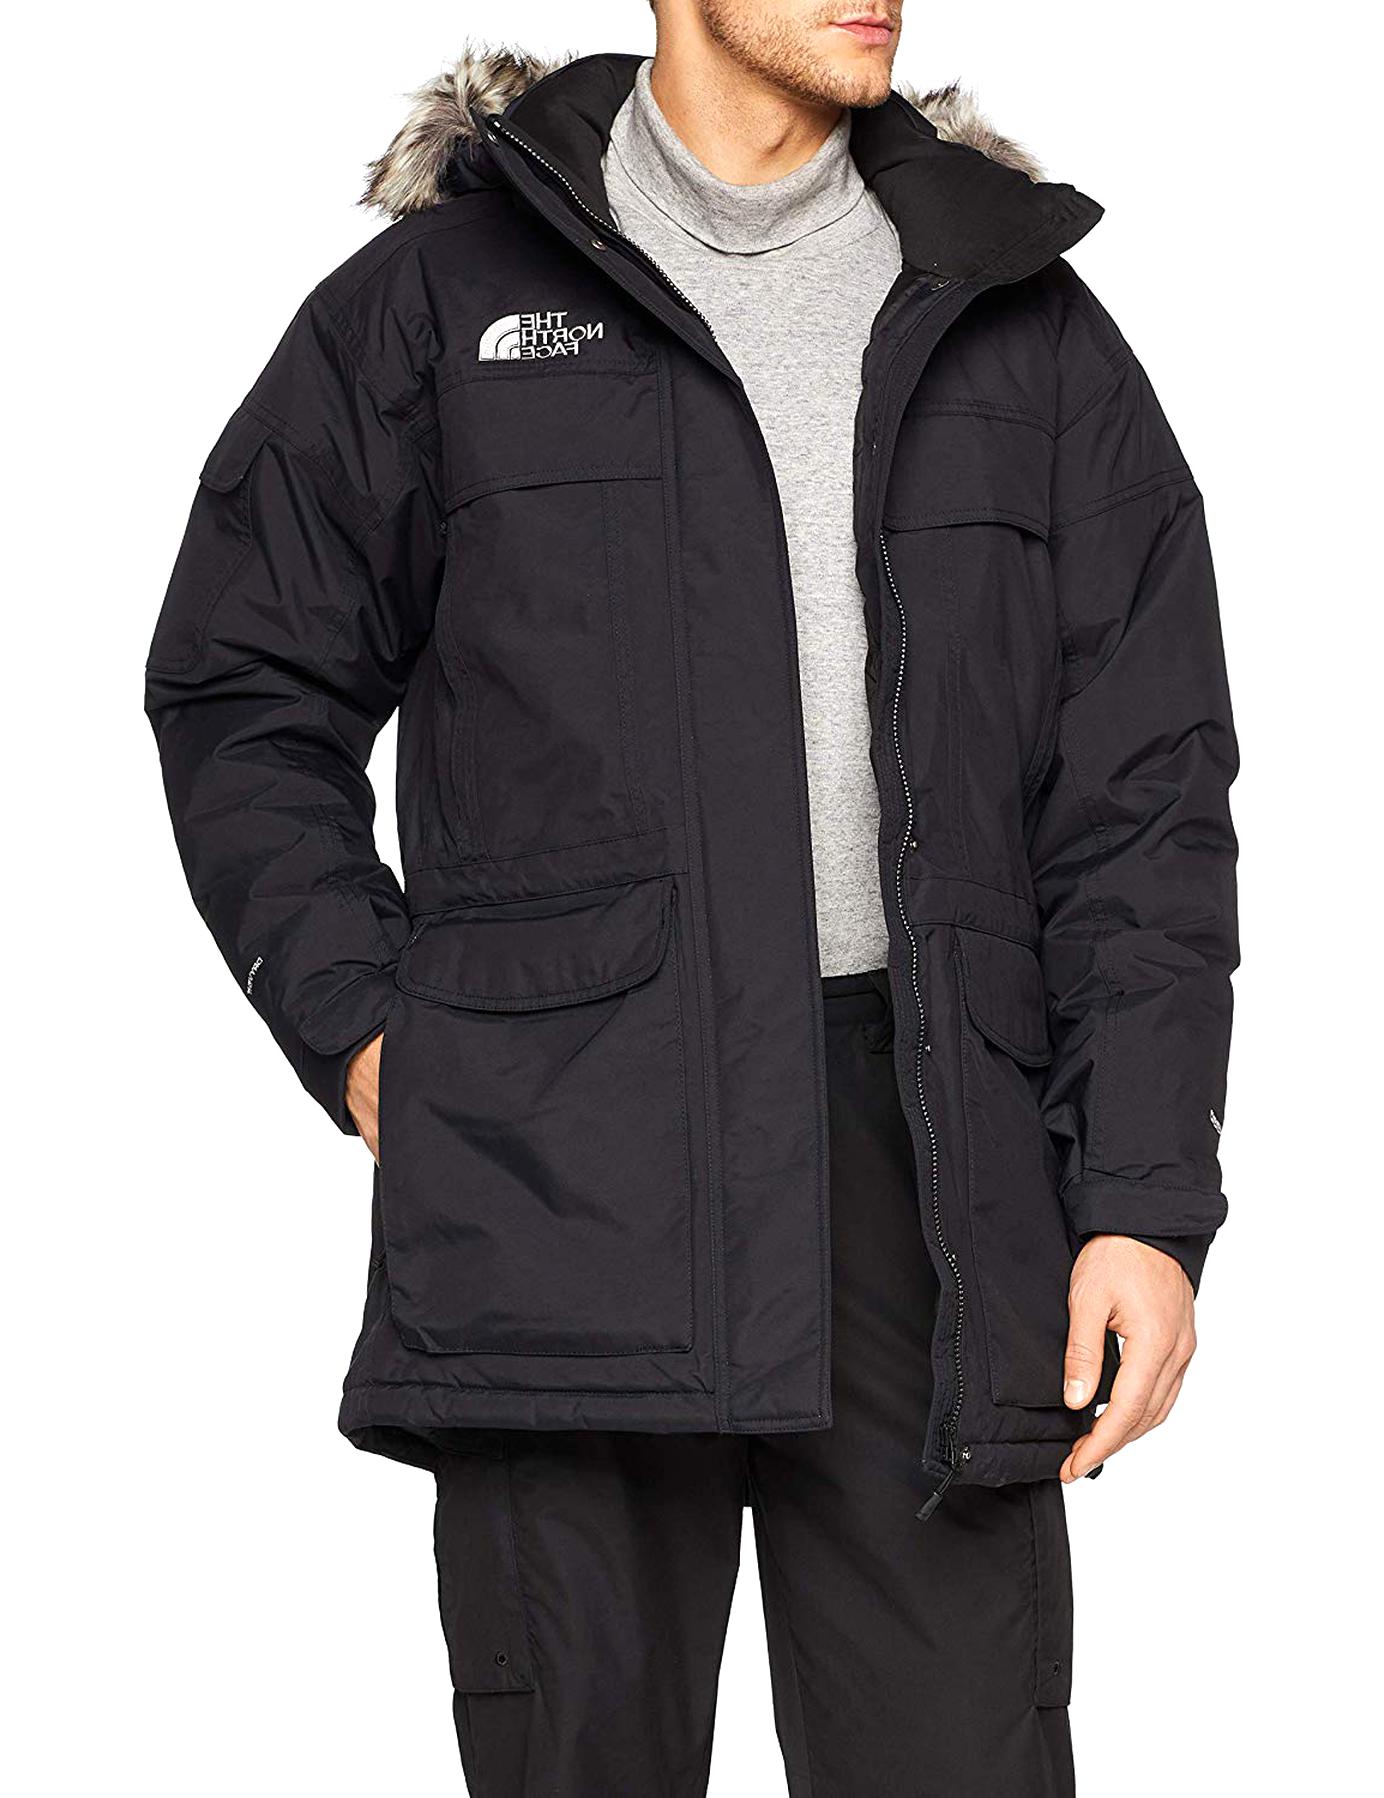 North Face Mcmurdo Parka for sale in UK | 75 used North Face Mcmurdo Parkas